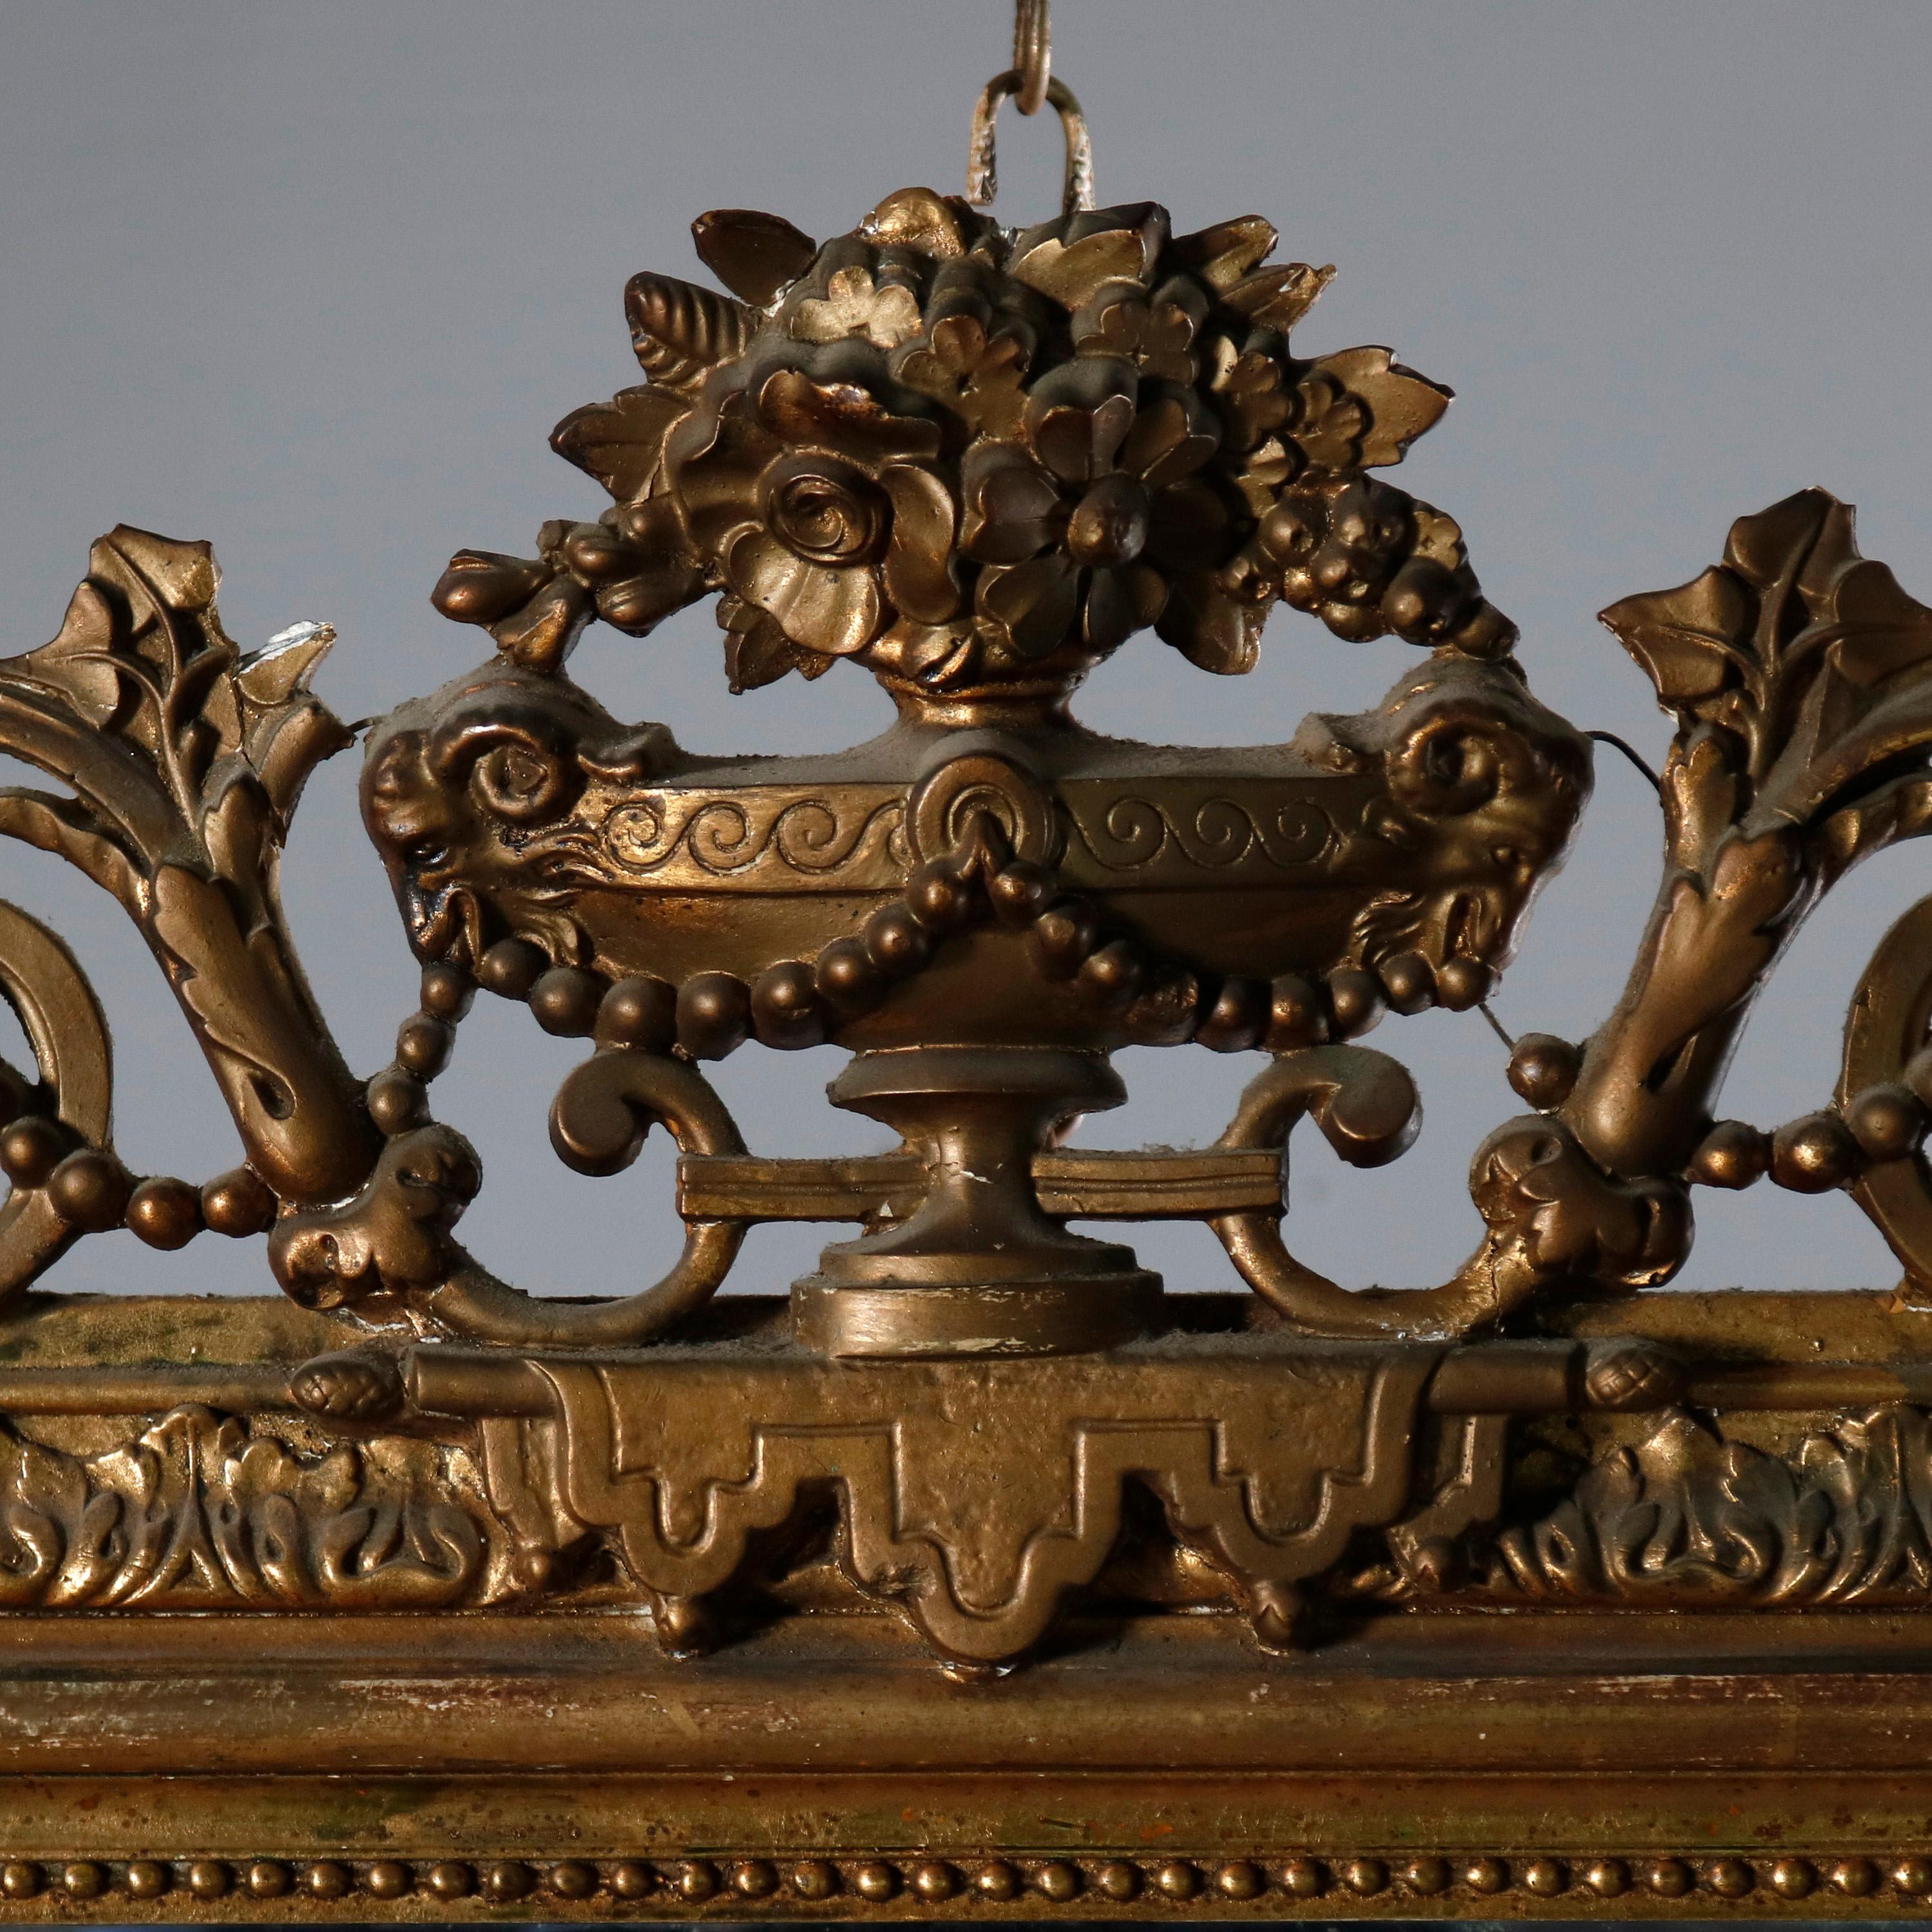 An antique French Louis XV style over mantel mirror offers giltwood frame with pierced crest having central panier de fleurs (urn of flowers) flanked by scroll and foliate decoration, corners with floral and foliate corners, circa 1870

Measures: